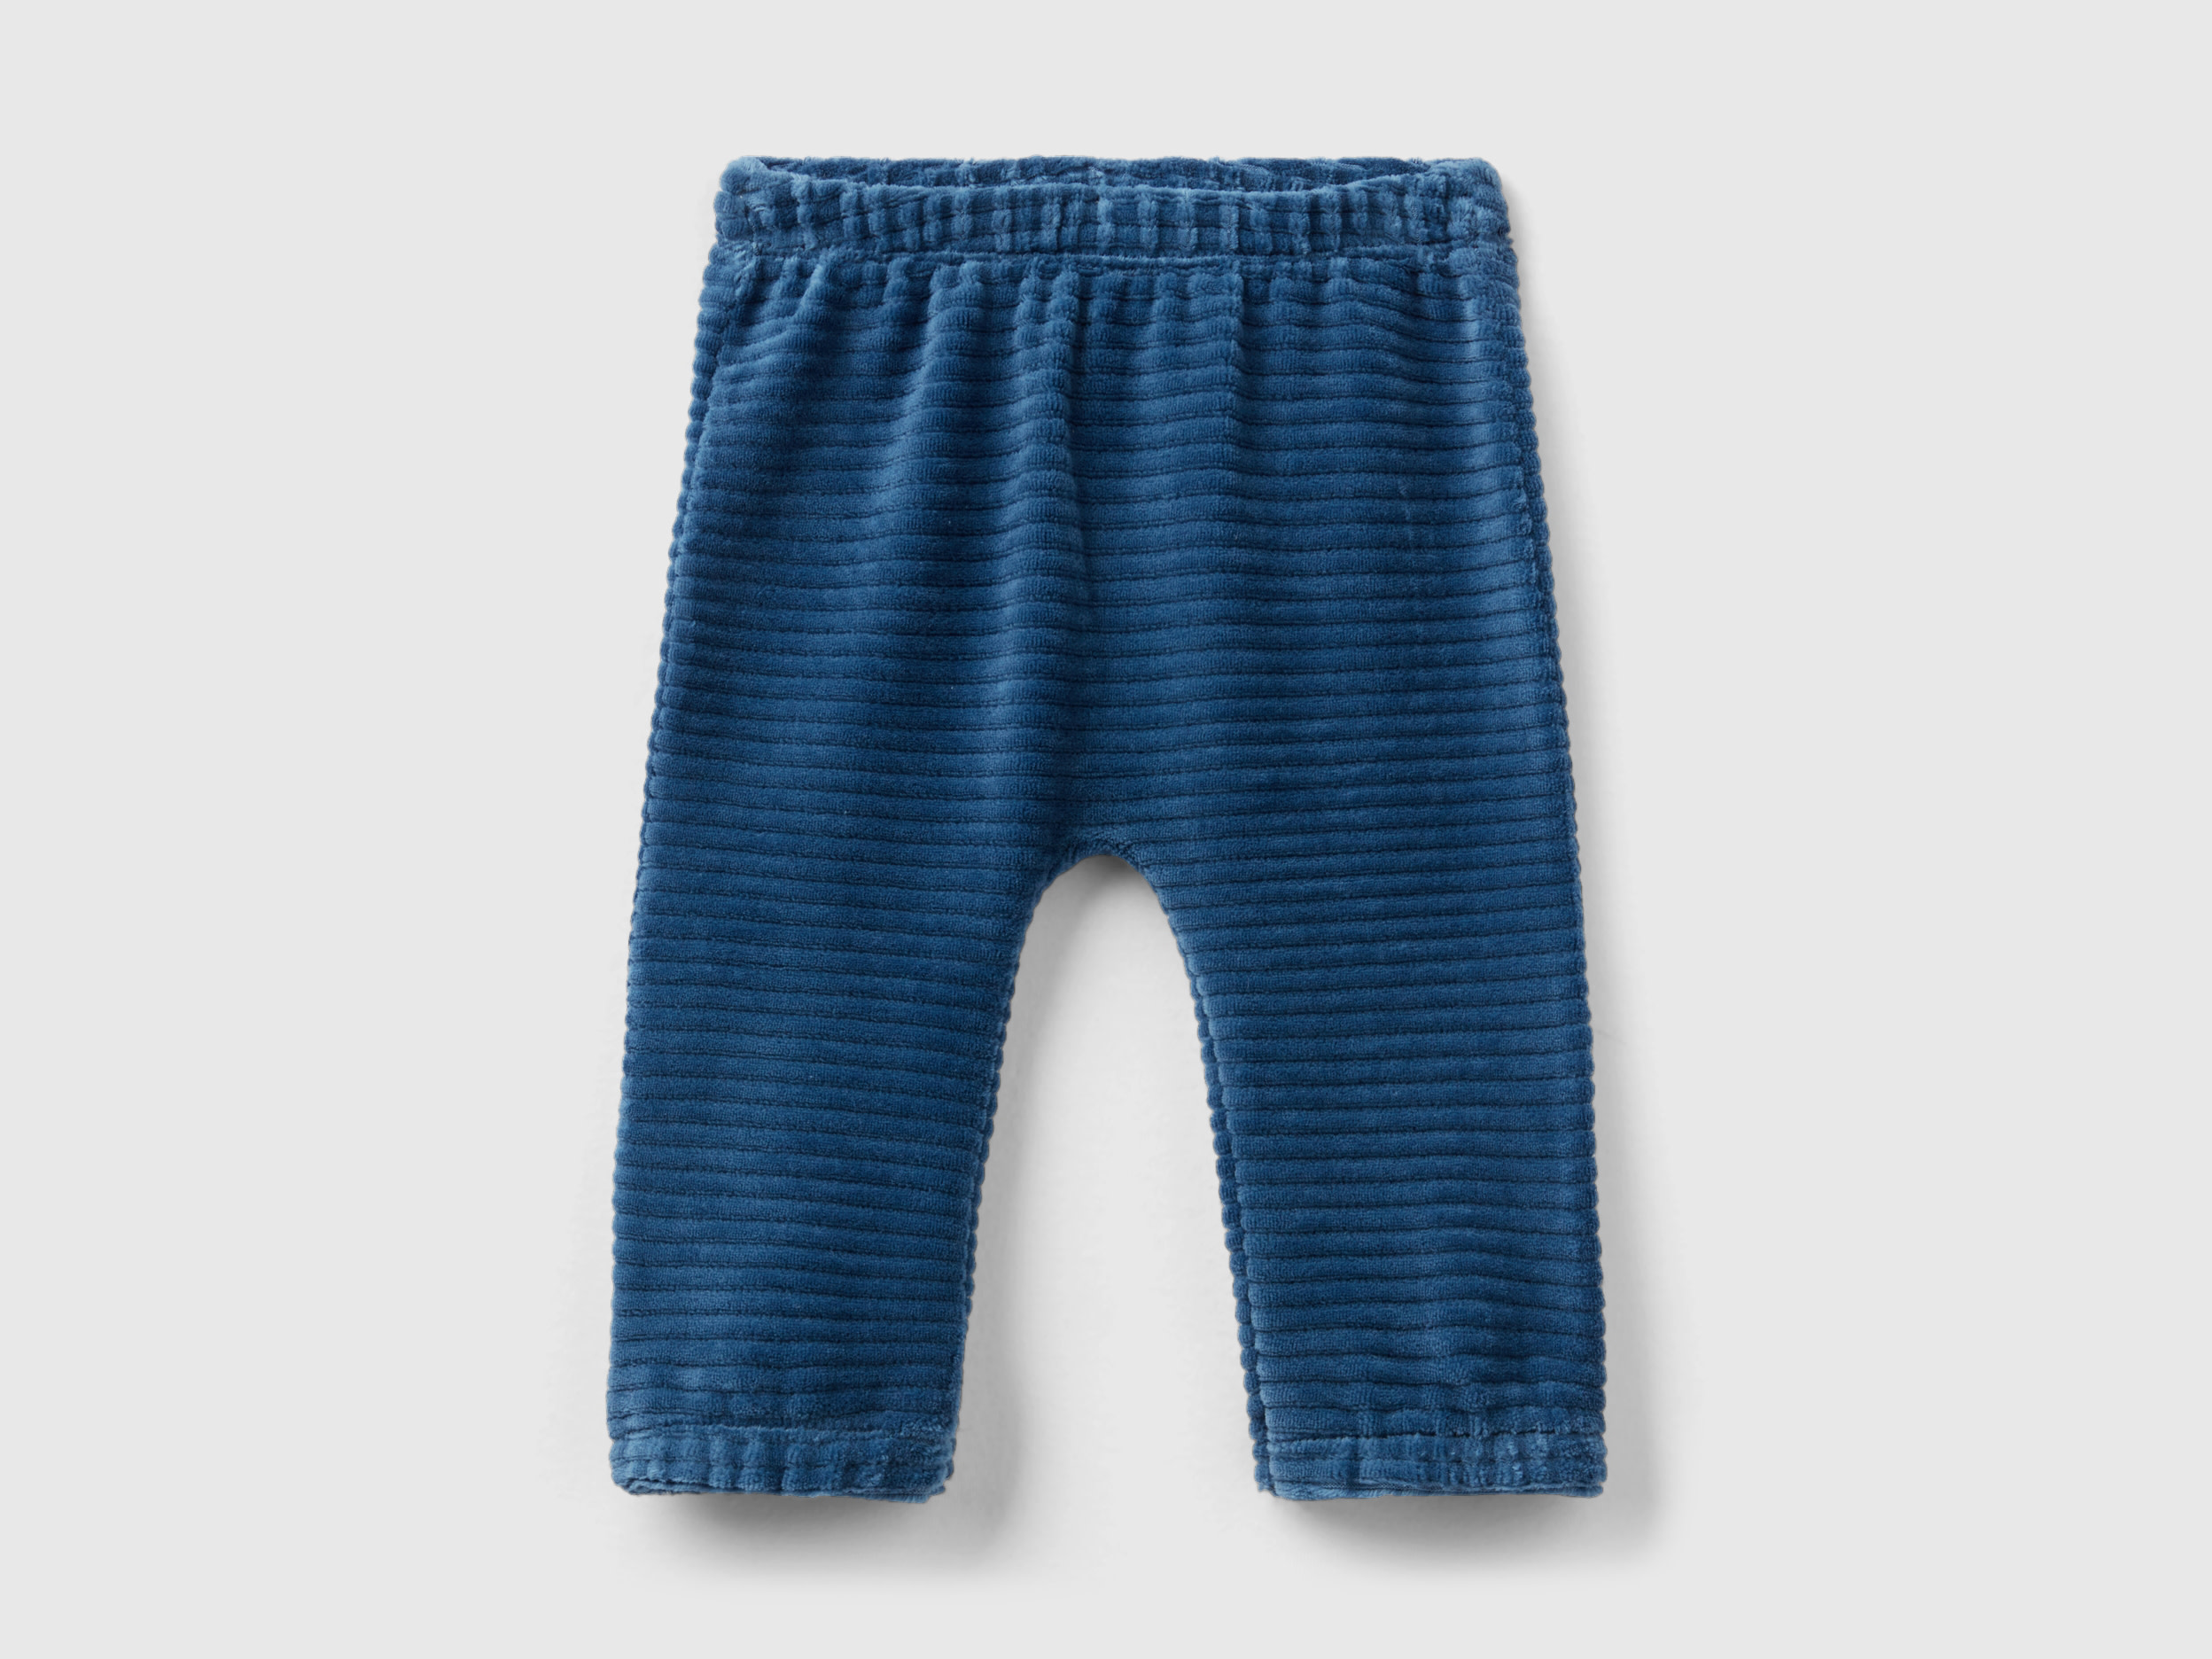 Benetton, Chenille Trousers With Embroidery, size 9-12, Blue, Kids